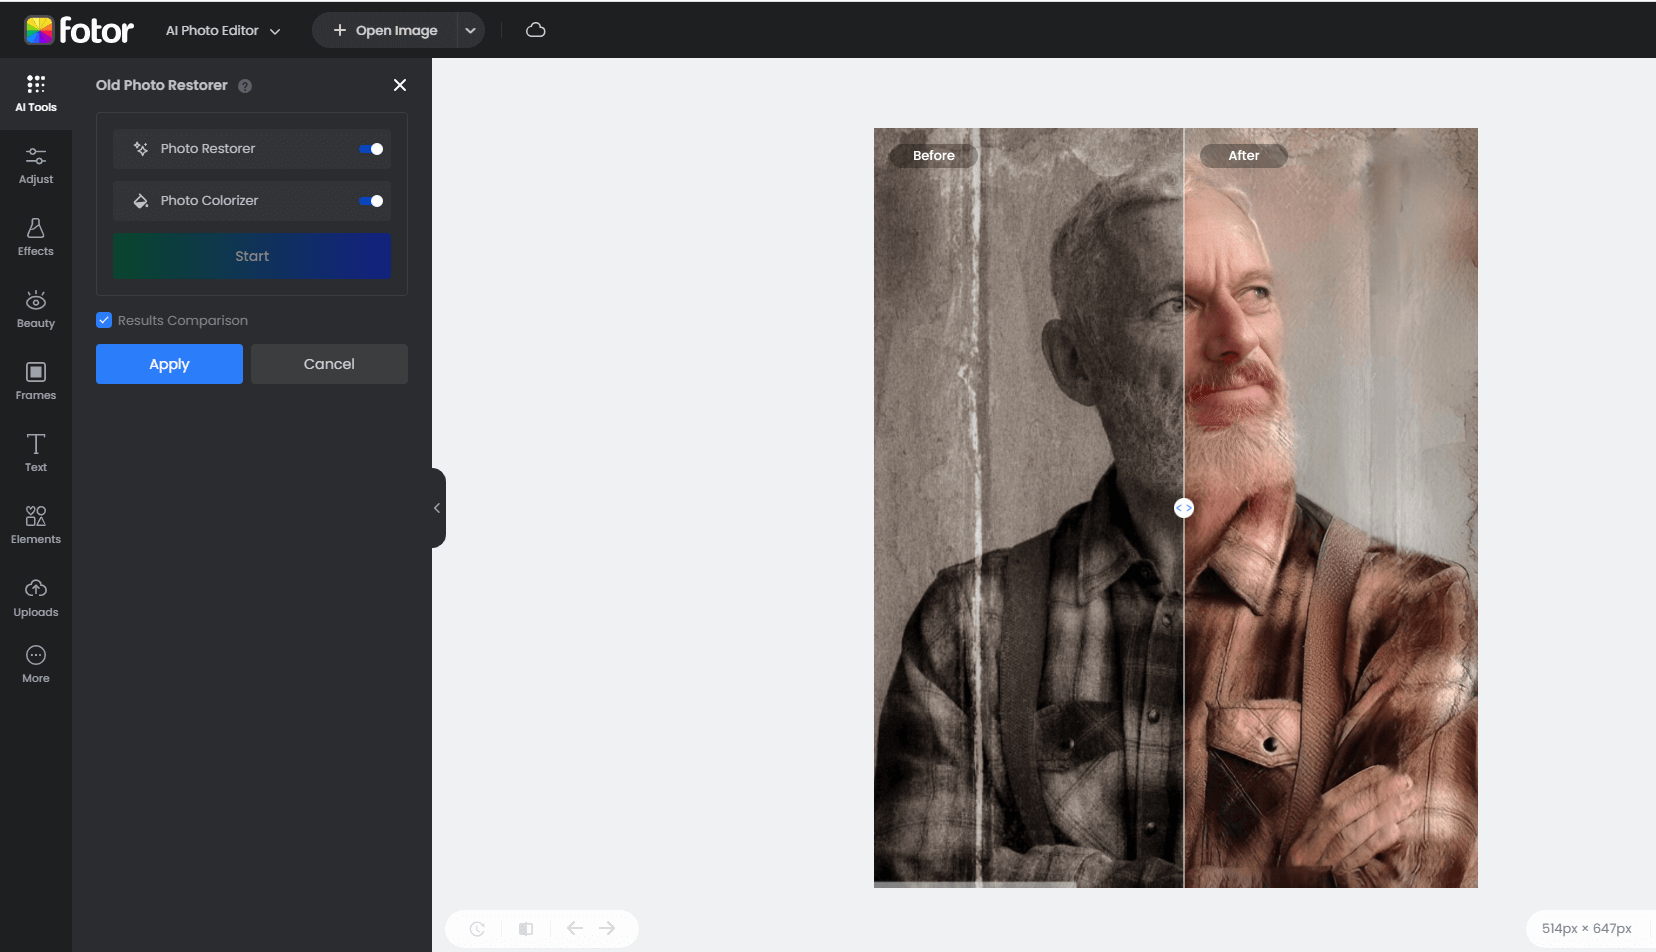 use fotor old photo restorer to restore and colorize old photo of an elderly man